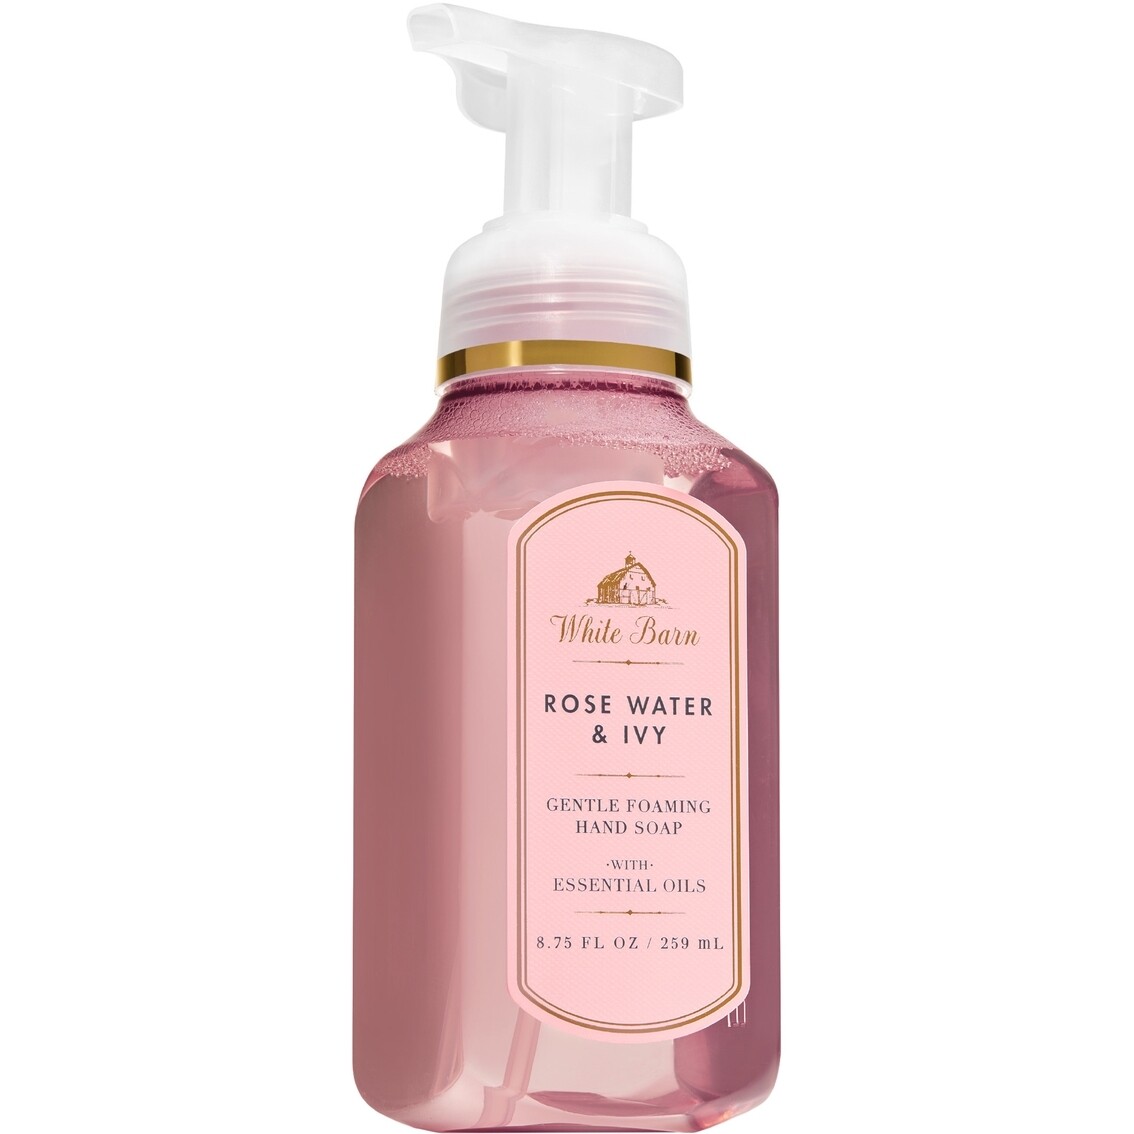 ROSEWATER AND IVY-Gentle Foaming Hand Soap